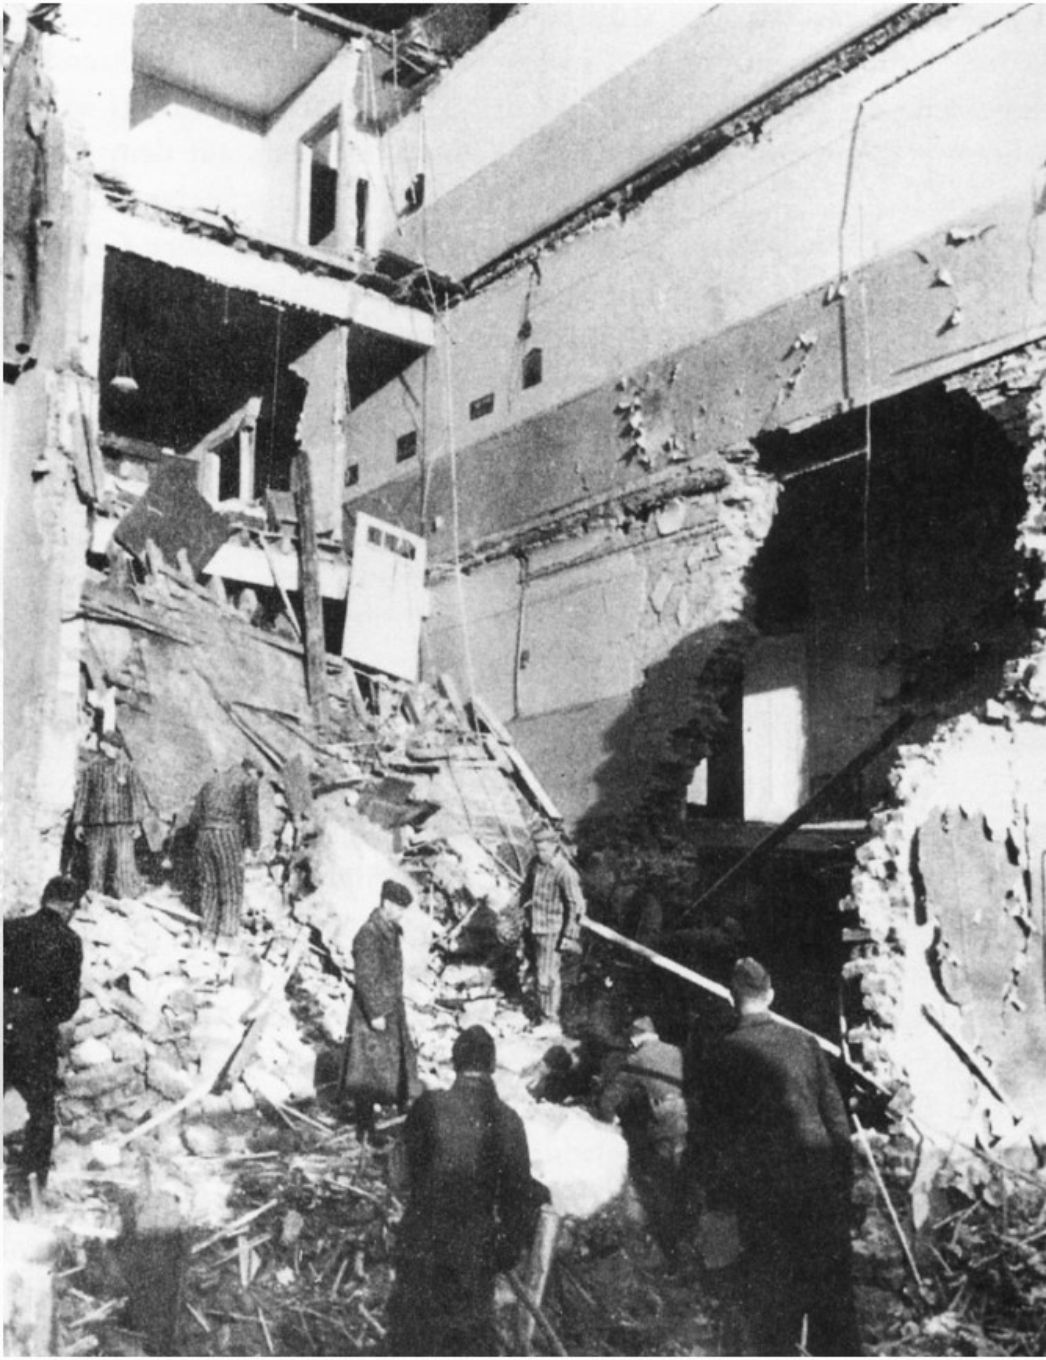 Concentration camp prisoners cleaning up after the bombing. You can see several men in prisoner's clothing shoveling rubble and rubble out of a bombed-out building.